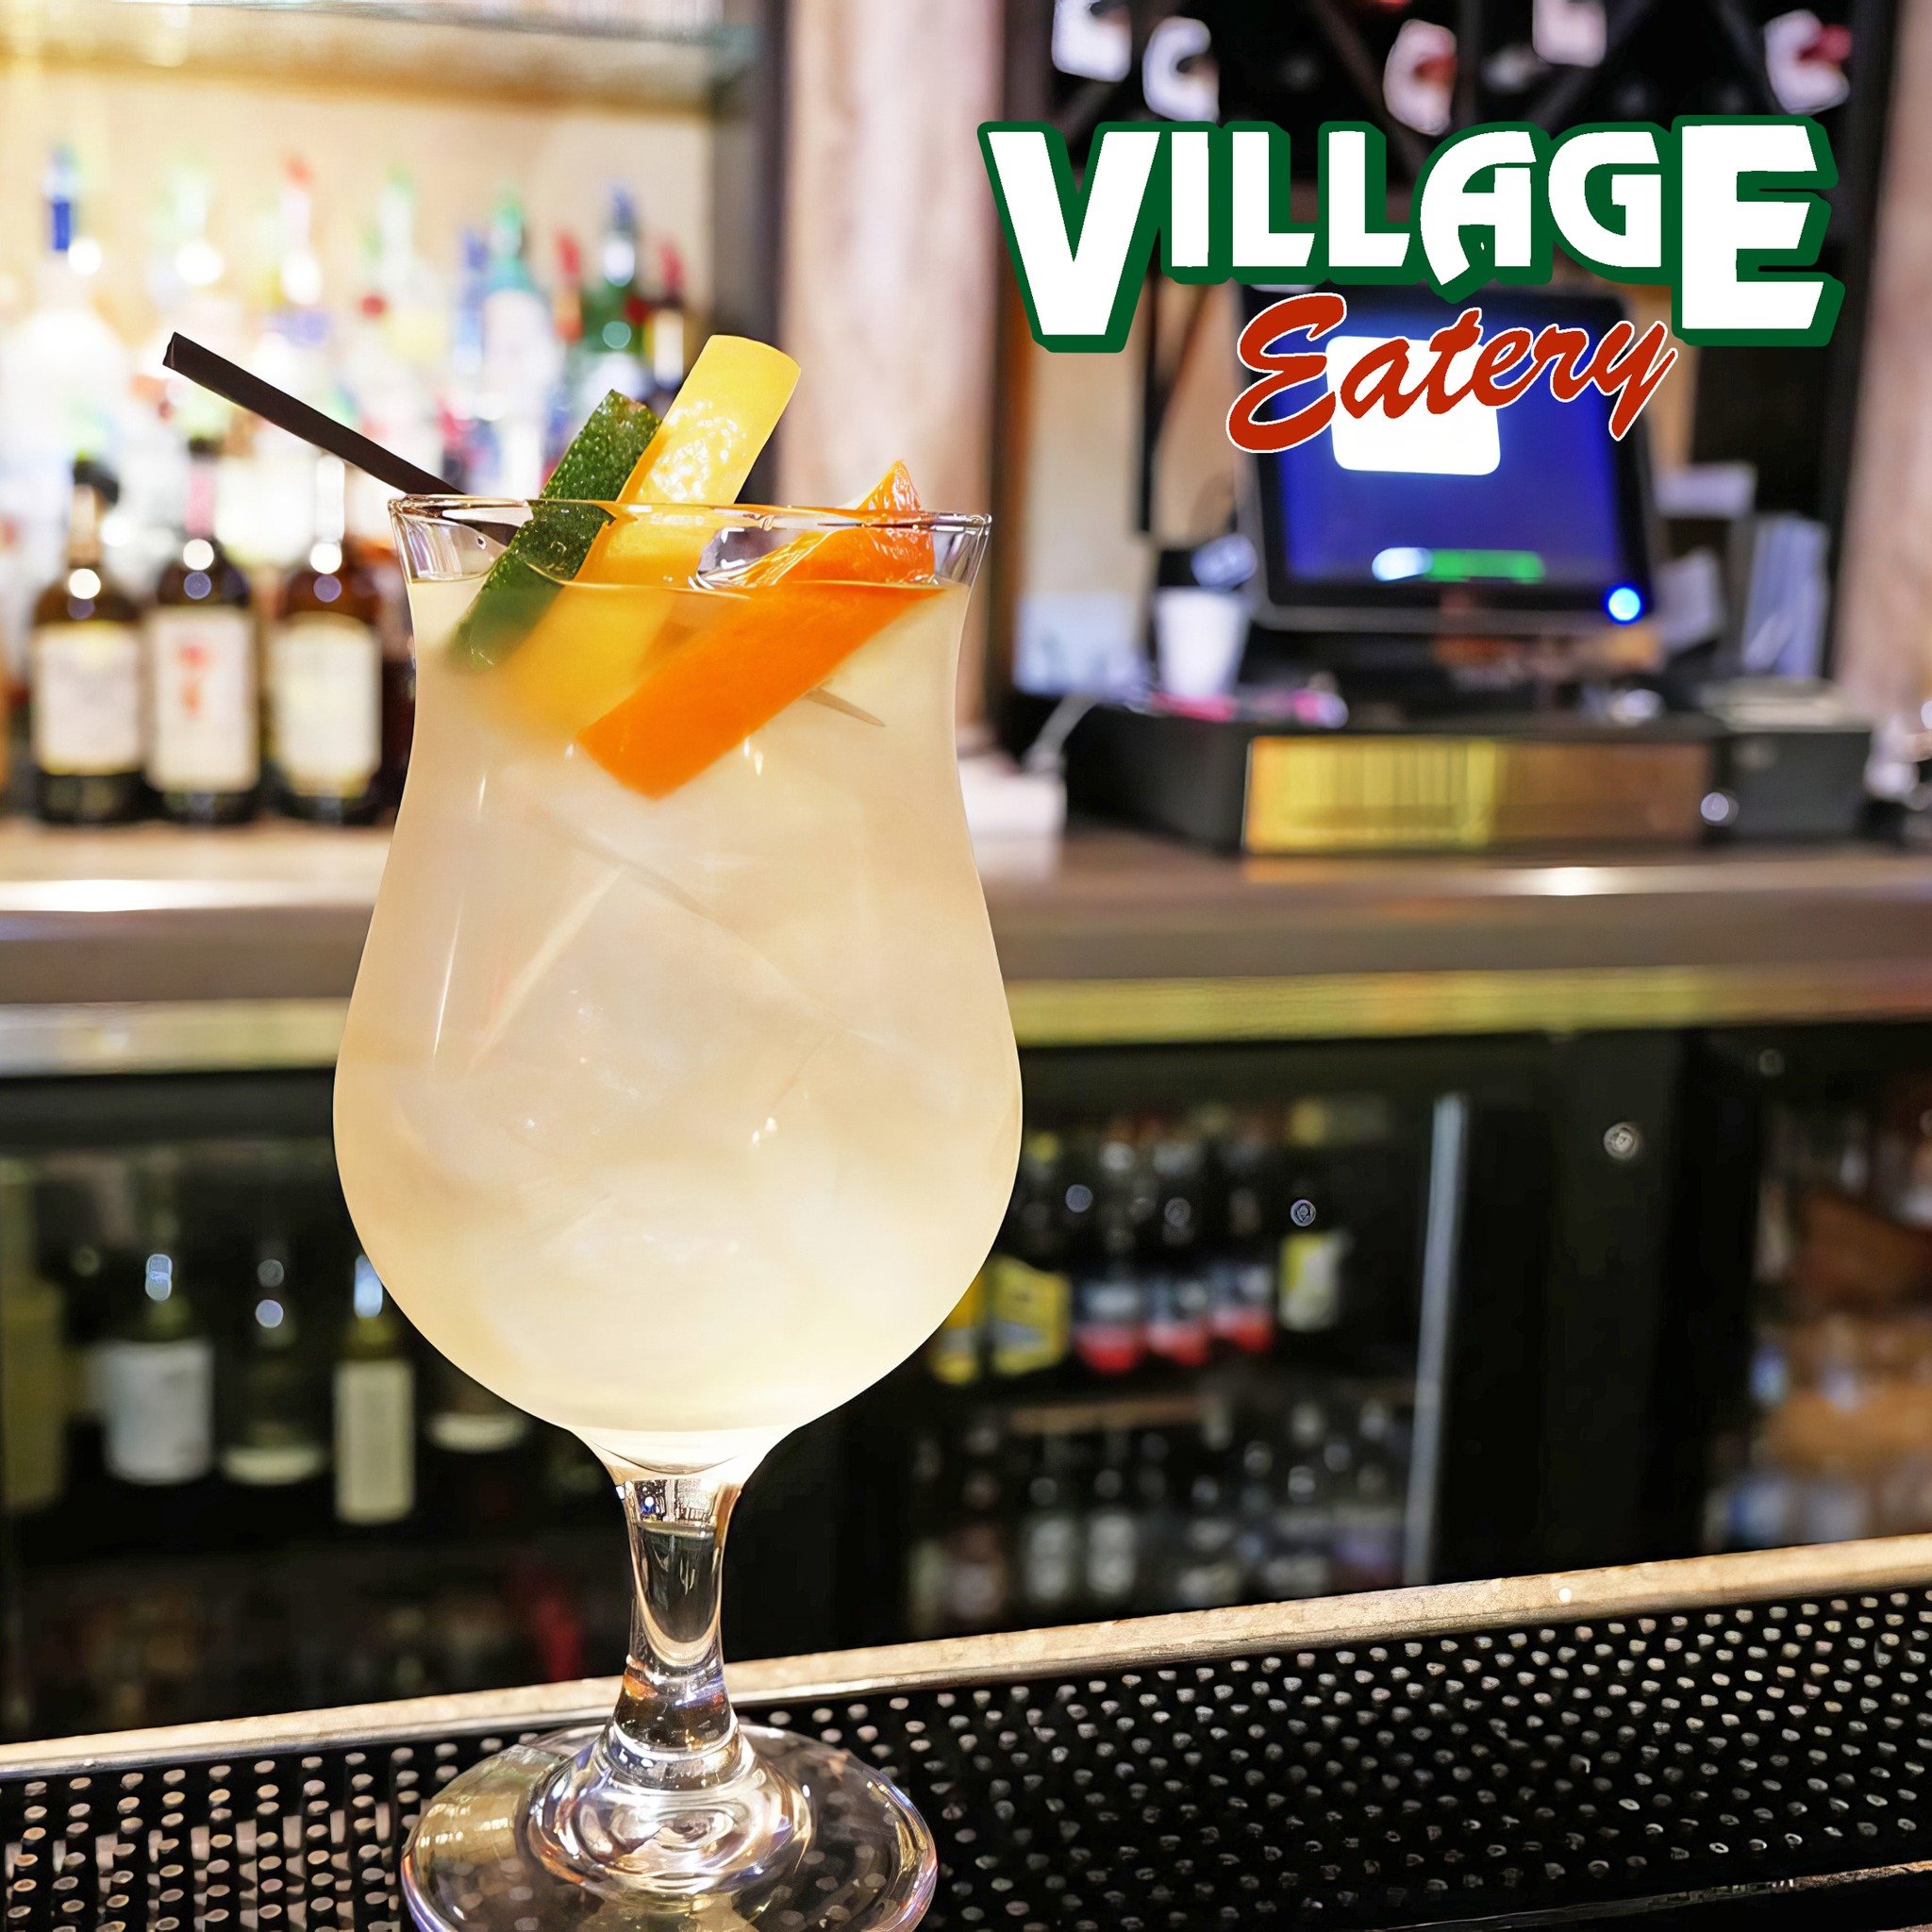 𝐖𝐡𝐨 𝐂𝐨𝐮𝐥𝐝 𝐔𝐬𝐞 𝐚 𝐒𝐚𝐧𝐠𝐫𝐢𝐚 𝐓𝐨𝐝𝐚𝐲 𝐋𝐨𝐜𝐤𝐩𝐨𝐫𝐭?! 🍹🍸

Then come to Village Eatery for 2-for-1 House-made Sangrias!  Enjoy some cocktails and the warm weather on our patio today 😊

𝗔𝗹𝘀𝗼, 𝗘𝘃𝗲𝗿𝘆 𝗠𝗼𝗻𝗱𝗮𝘆 𝗶𝘀 𝗣𝗮?